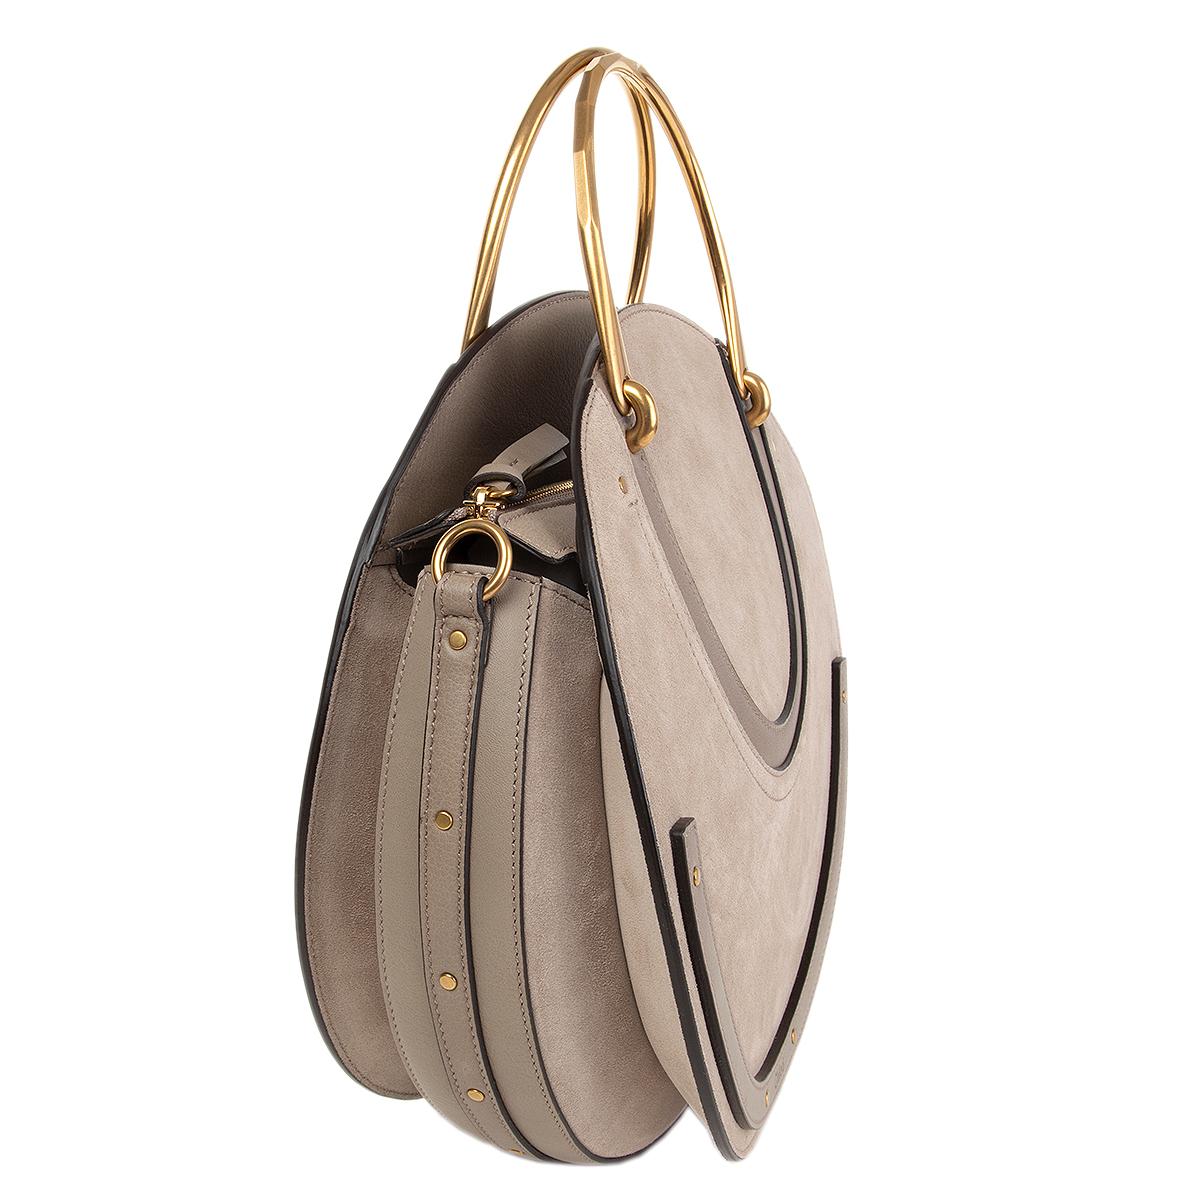 Chloé 'Pixie Medium Double Handle' circle shoulder bag in Motty grey paneled calfskin and suede with stud trim. Brassy round tote handles. Removable and adjustable shoulder strap. Flaps cover recessed zip top closure. Embossed logo at bottom center.